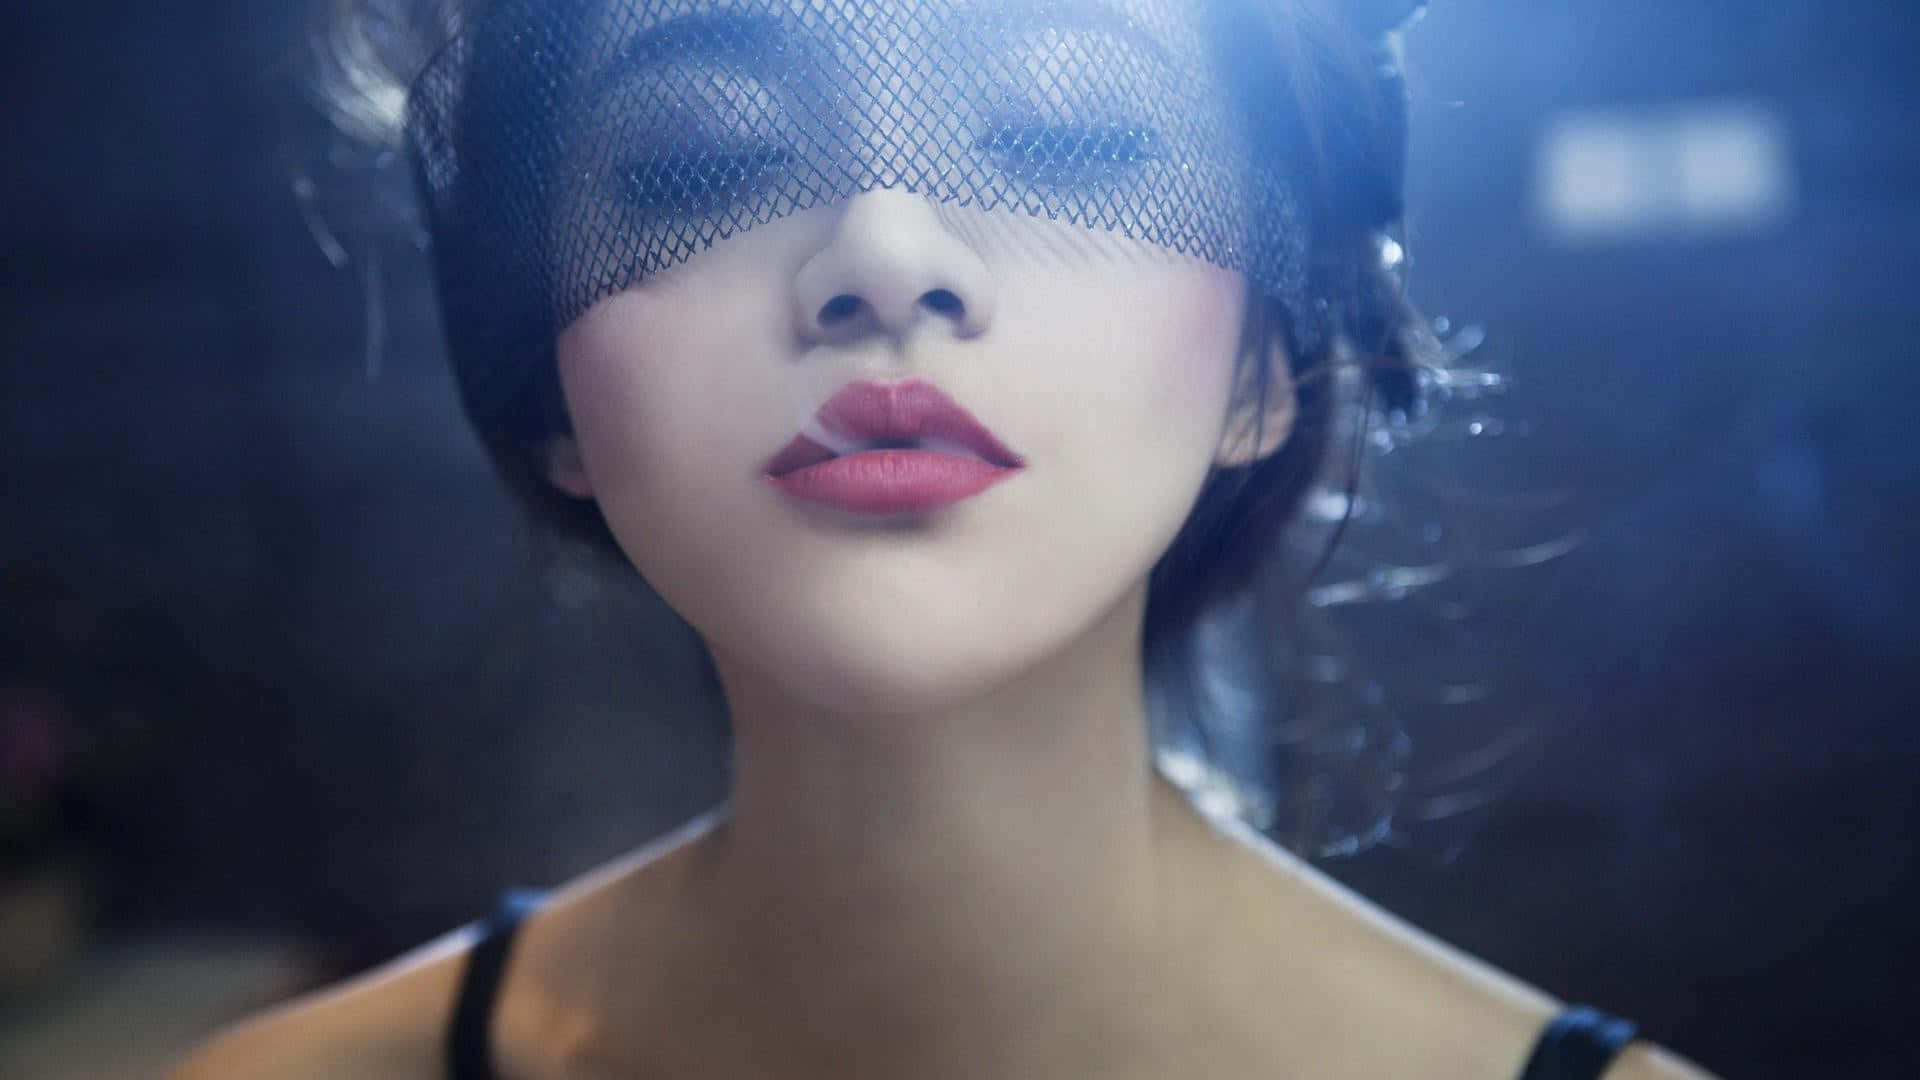 Asian With Lipstick Girl Smoking Background